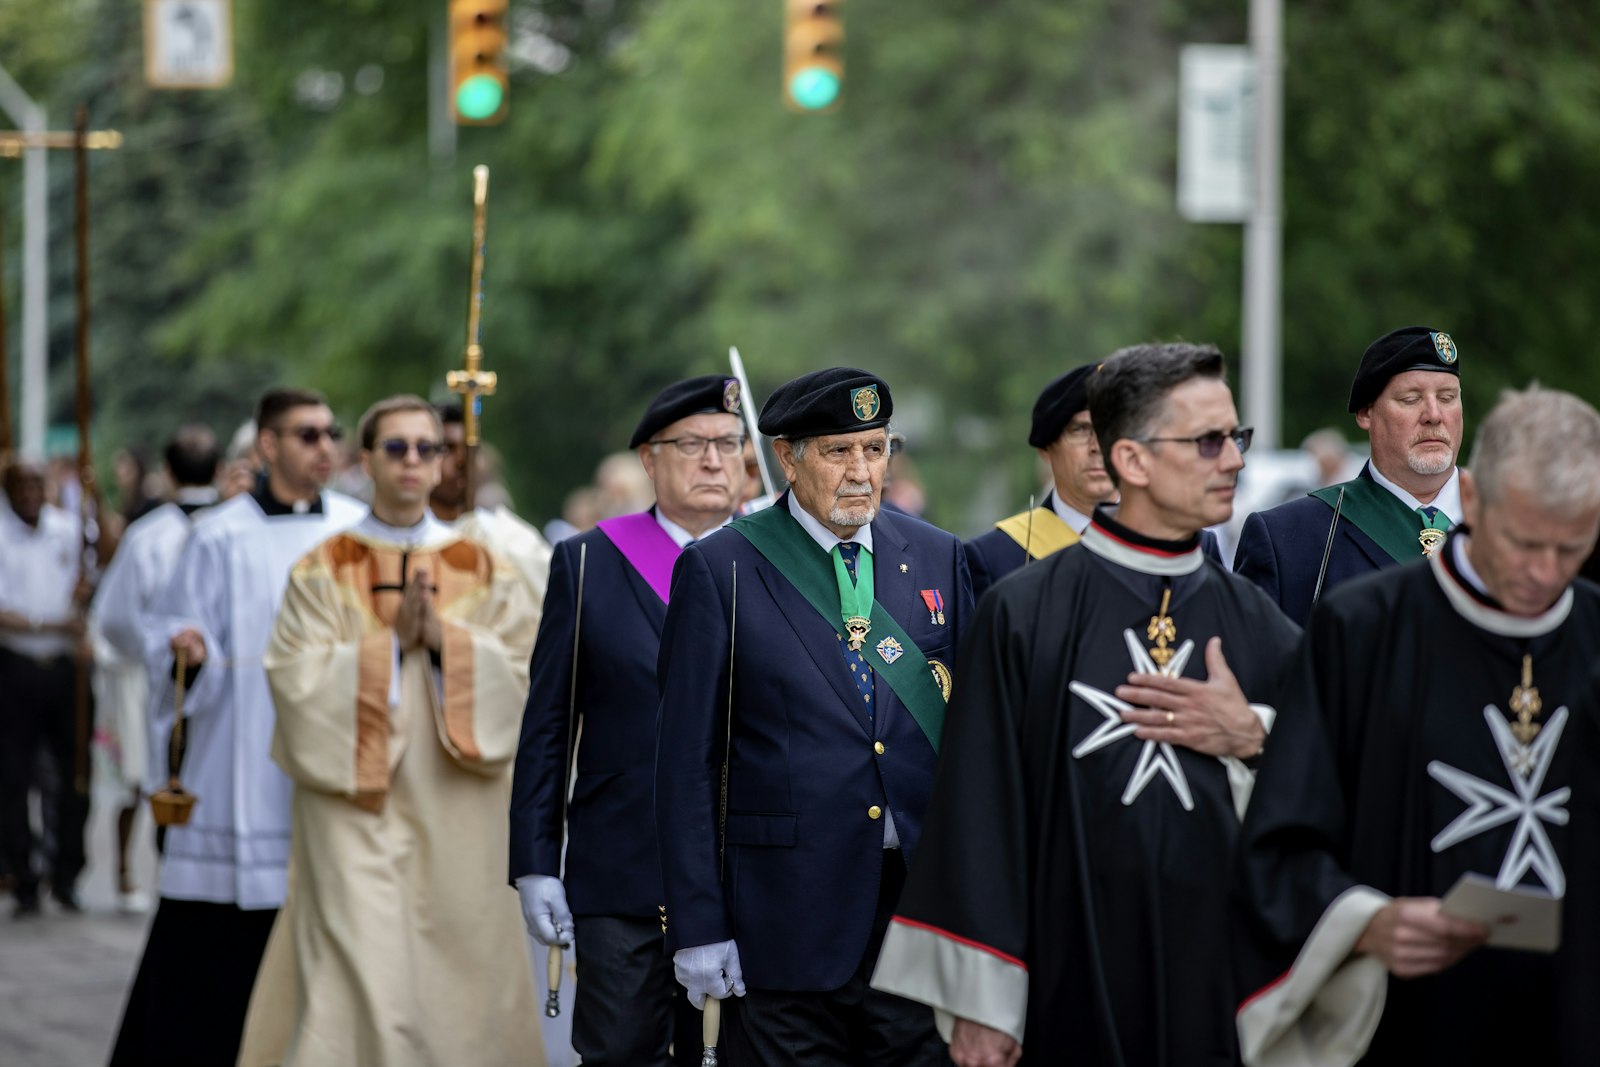 Members of the Knights and Dames of the Order of Malta, the Knights and Ladies of St. Peter Claver and the Knights of Columbus process in full regalia during the Eucharistic procession outside the cathedral. (Alissa Tuttle | Special to Detroit Catholic)